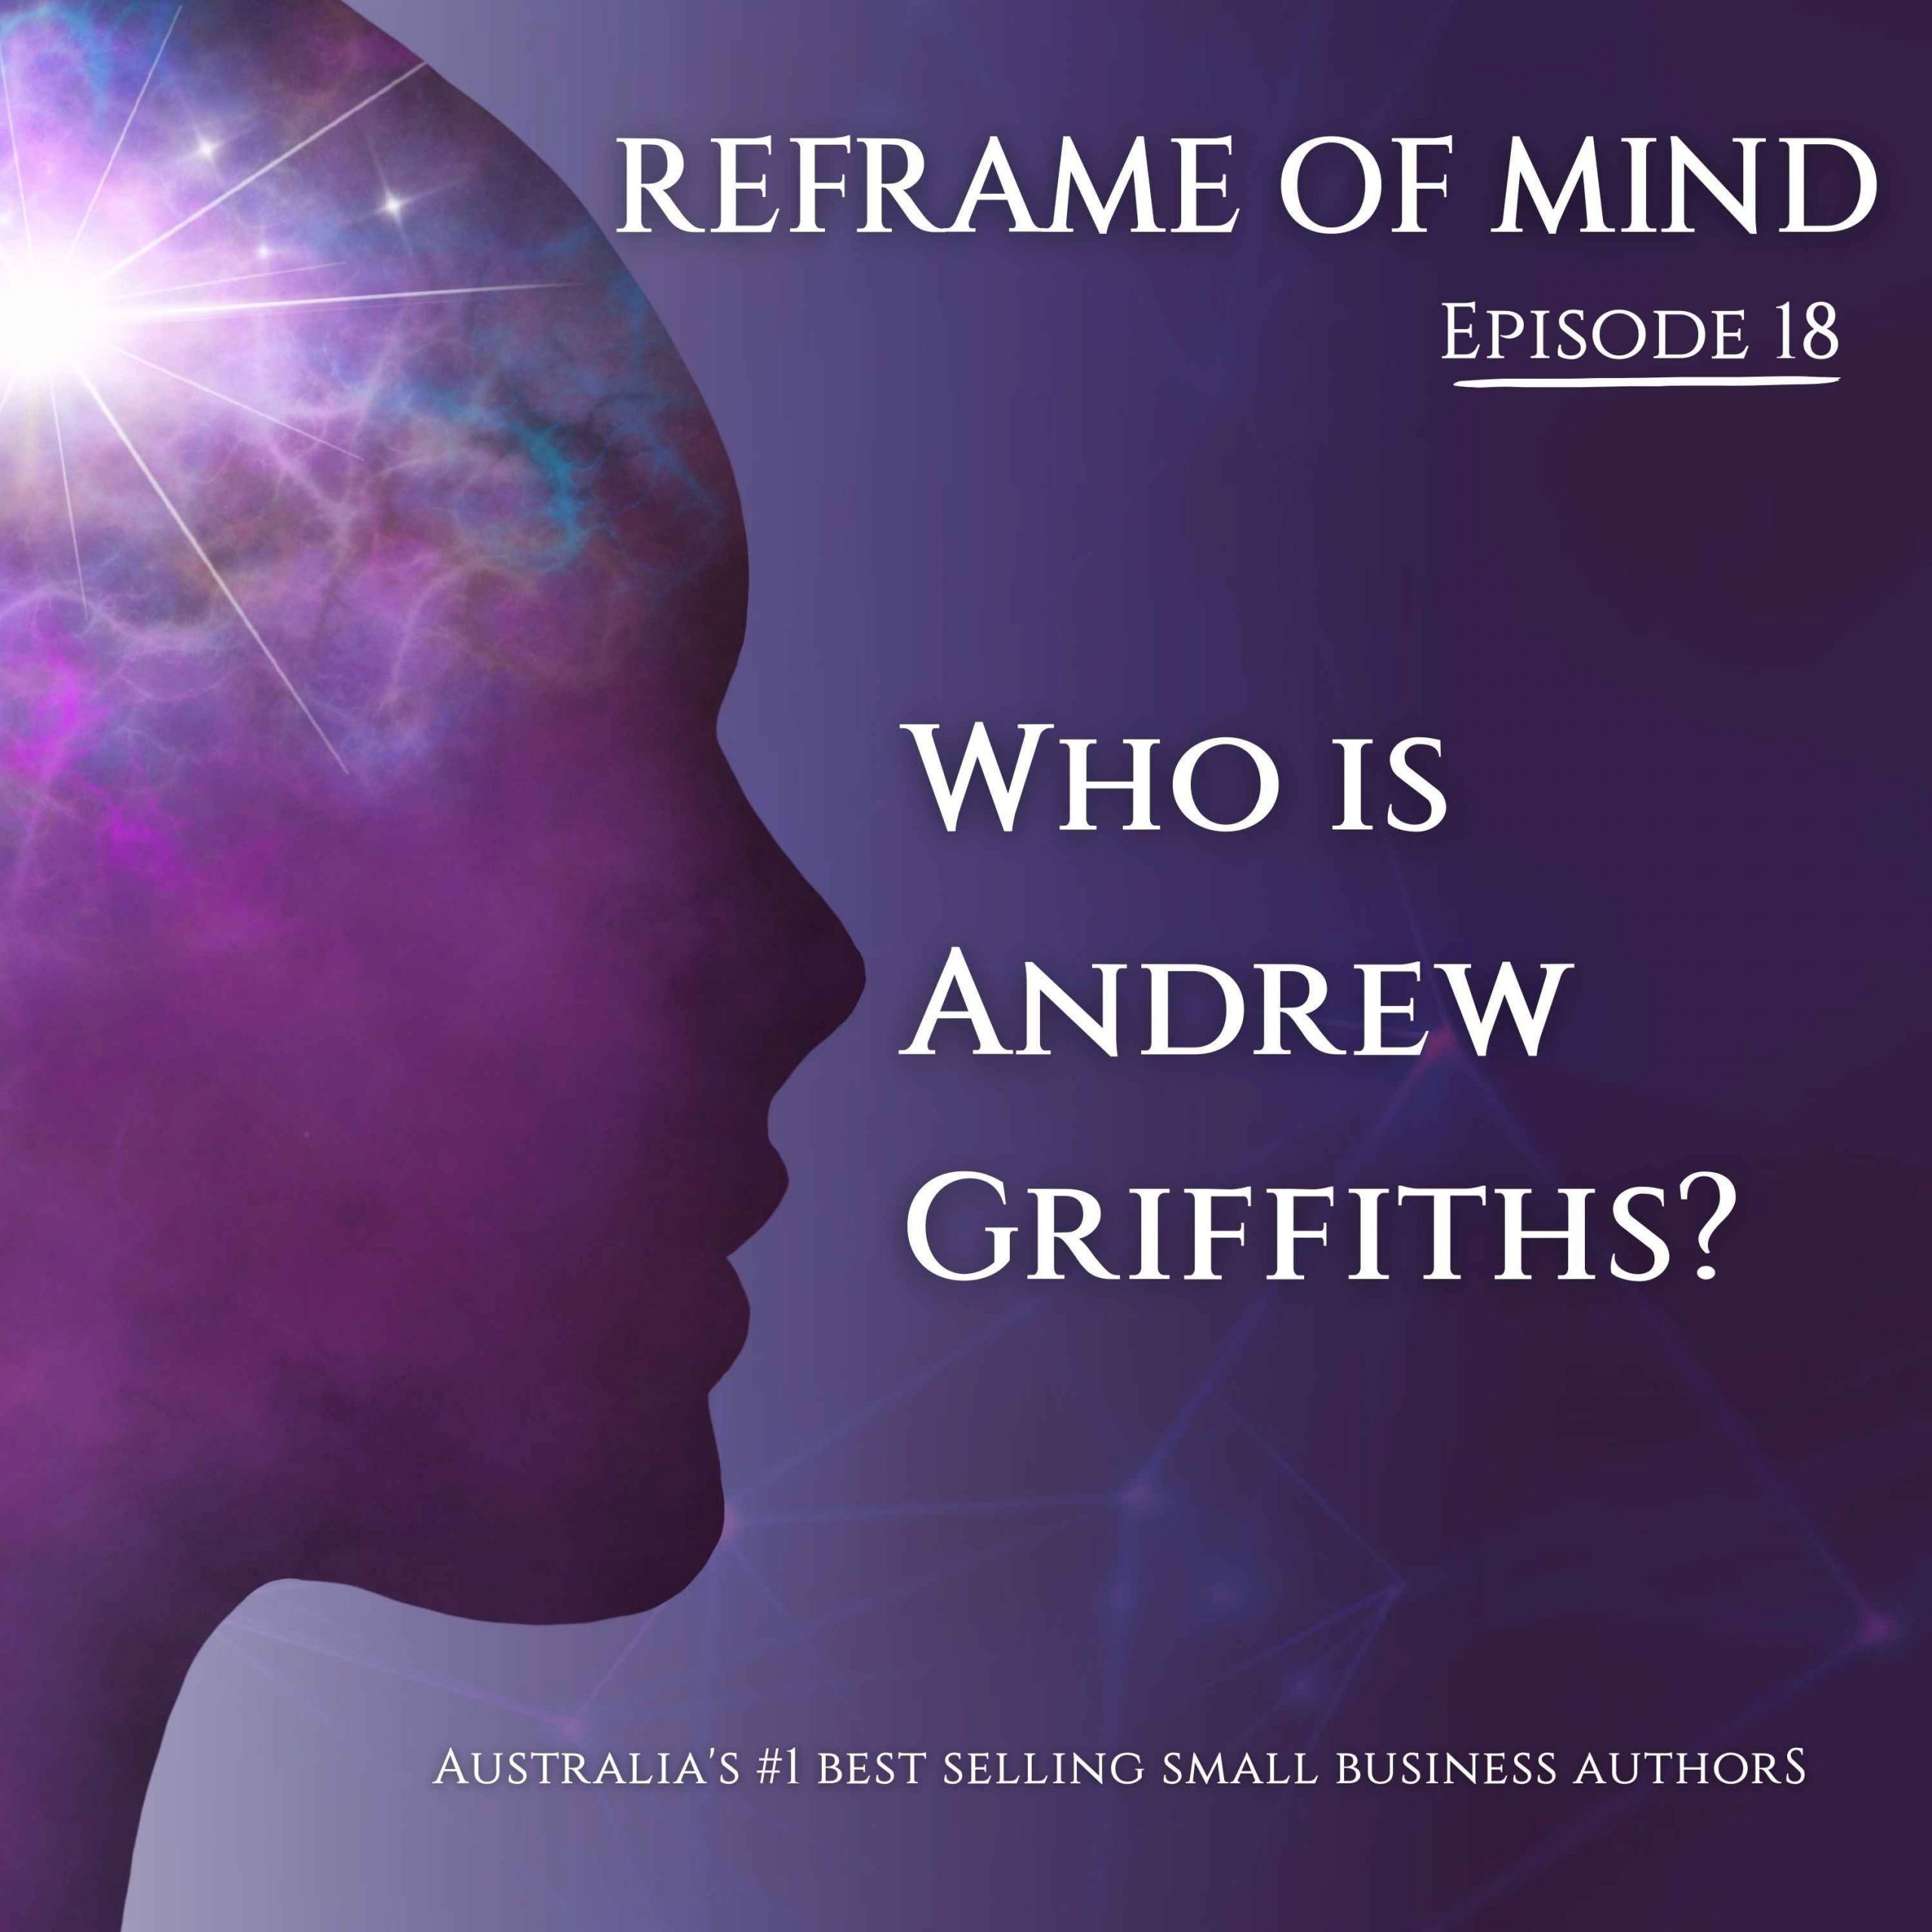 Episode 18: Who is Andrew Griffiths?